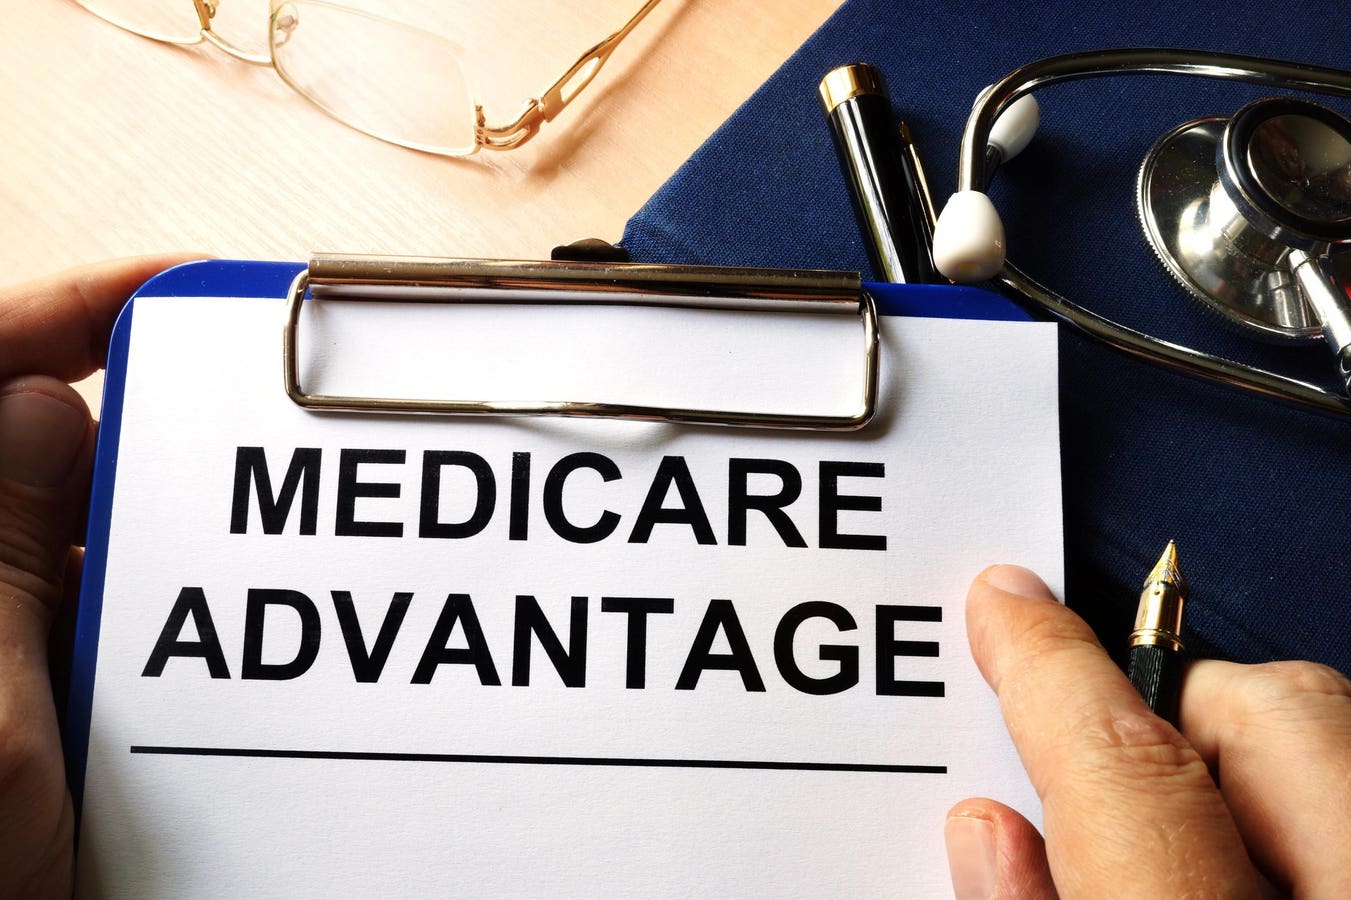 Medicare Advantage Insurers Hold Sway Over More Hospital Admissions